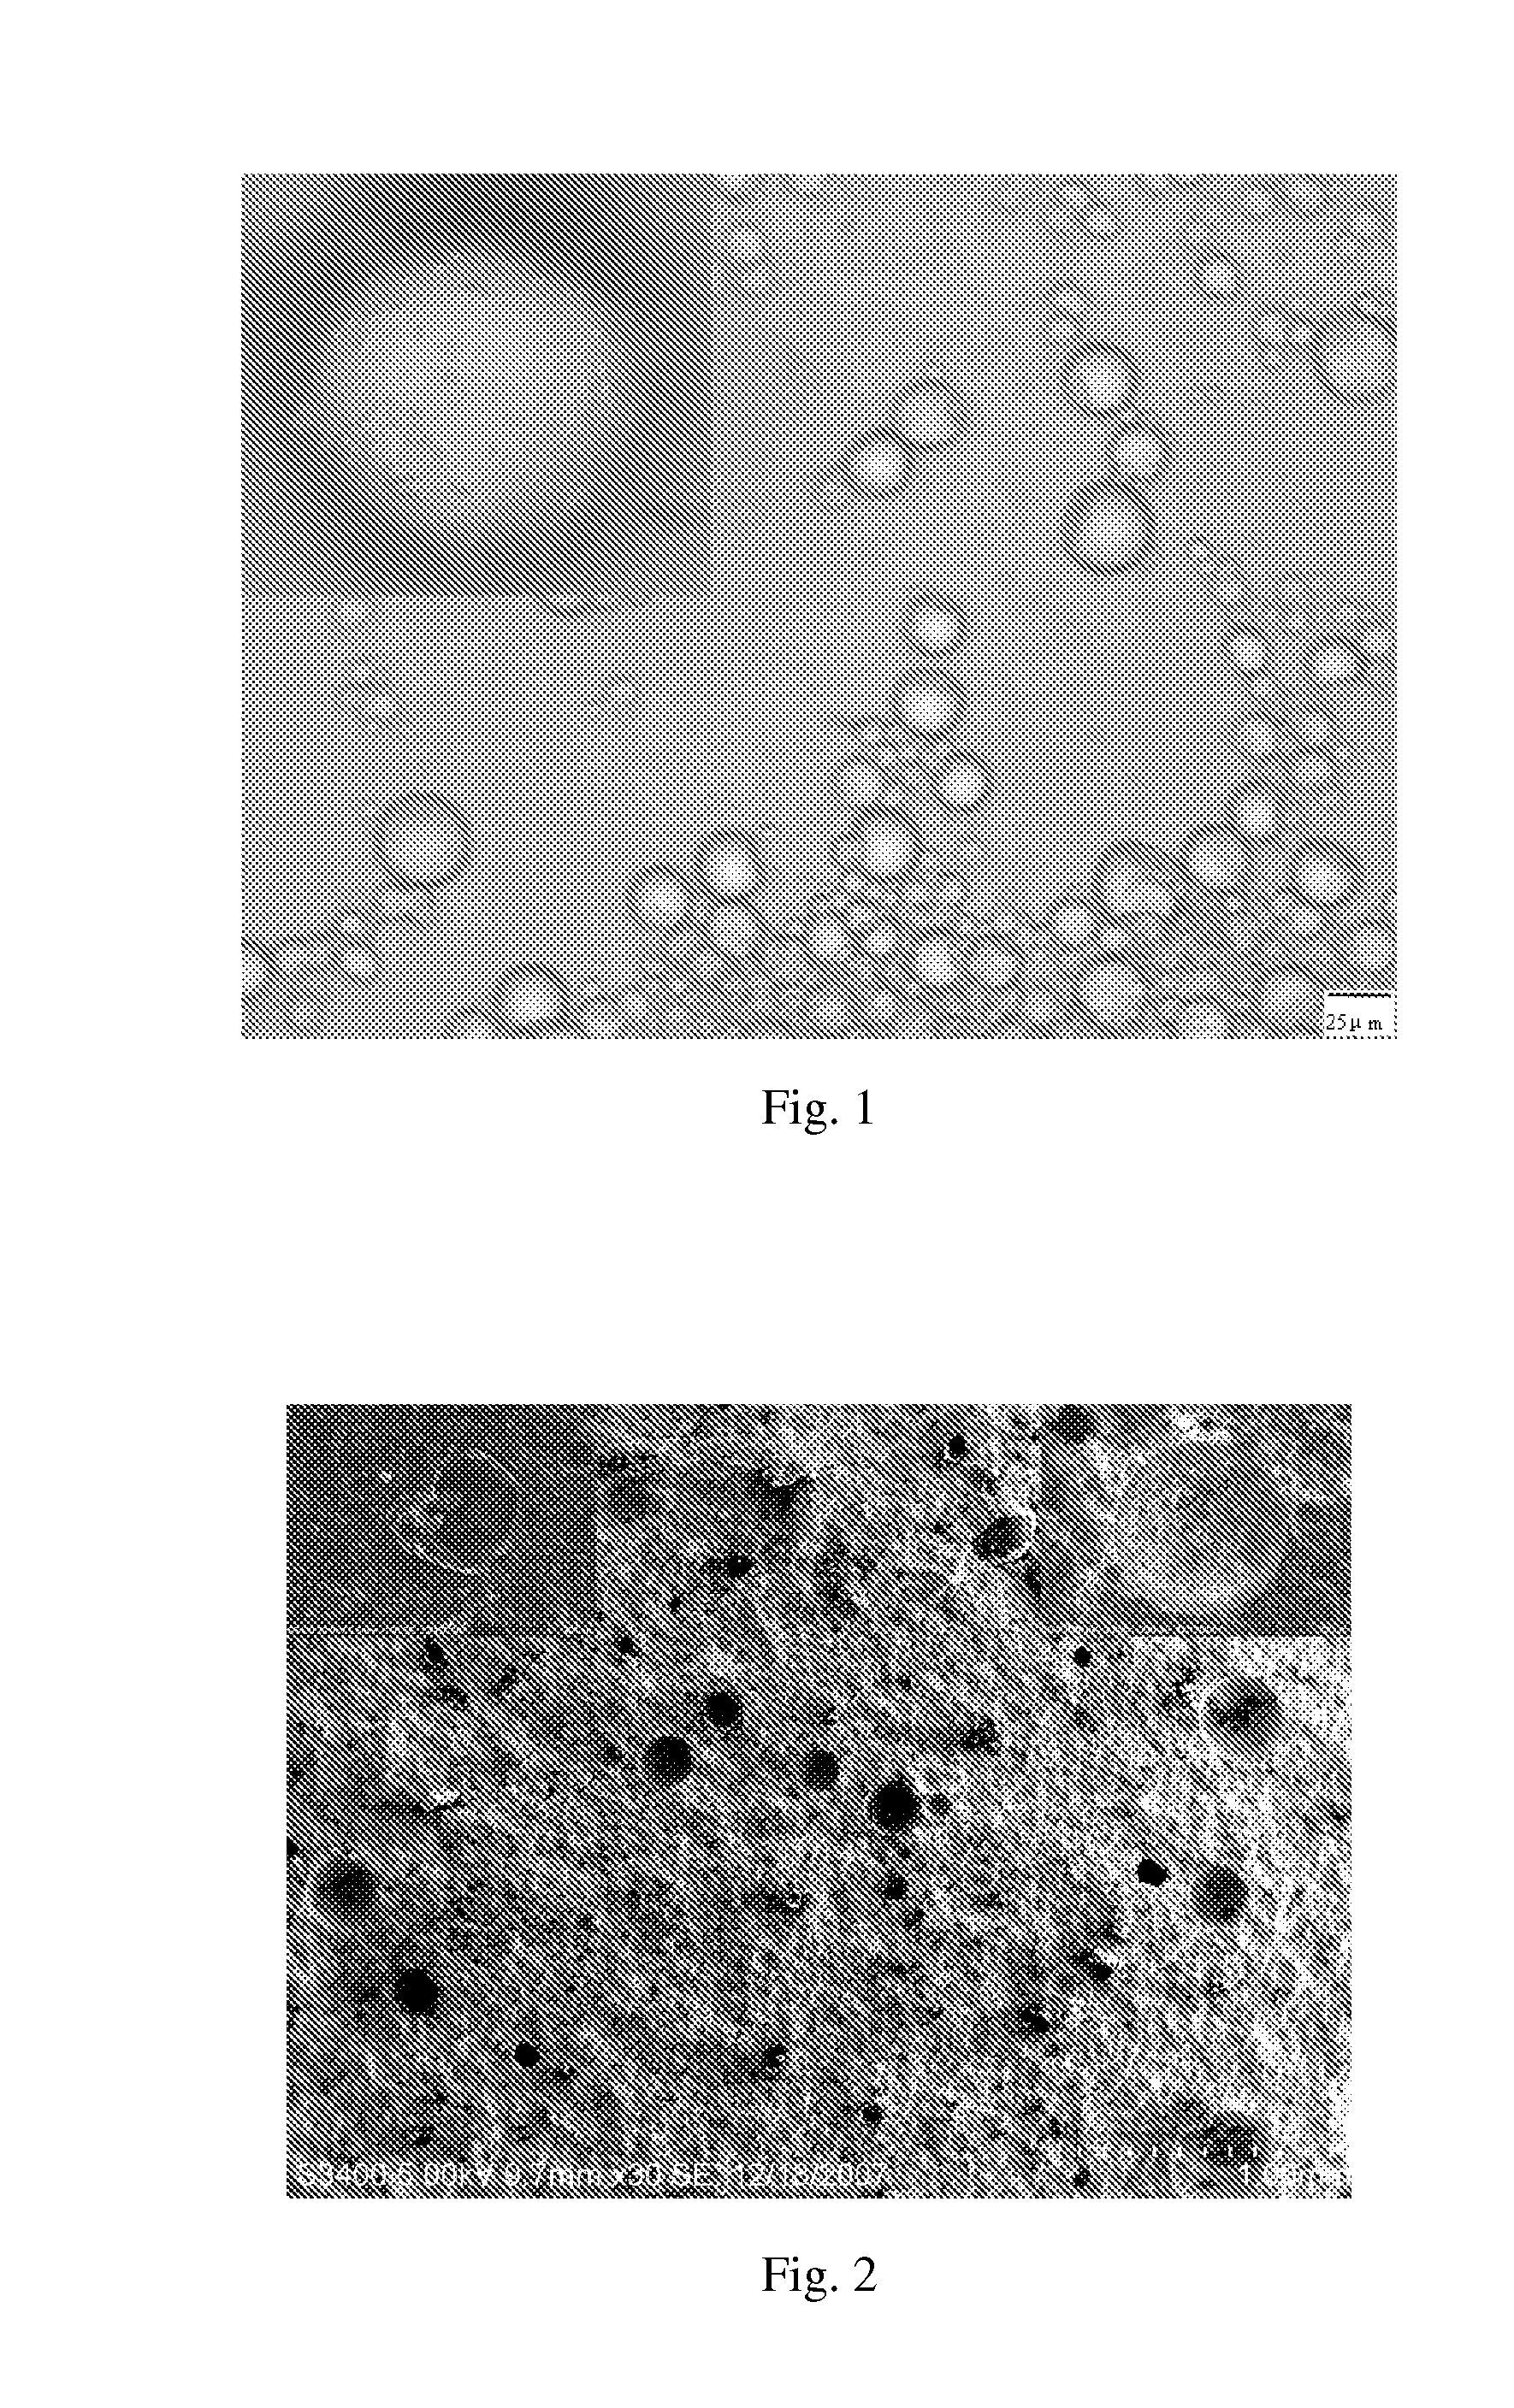 Self-Repairing Concrete Used Urea-Formaldehyde Resin Polymer Micro-Capsules and Method for Fabricating Same